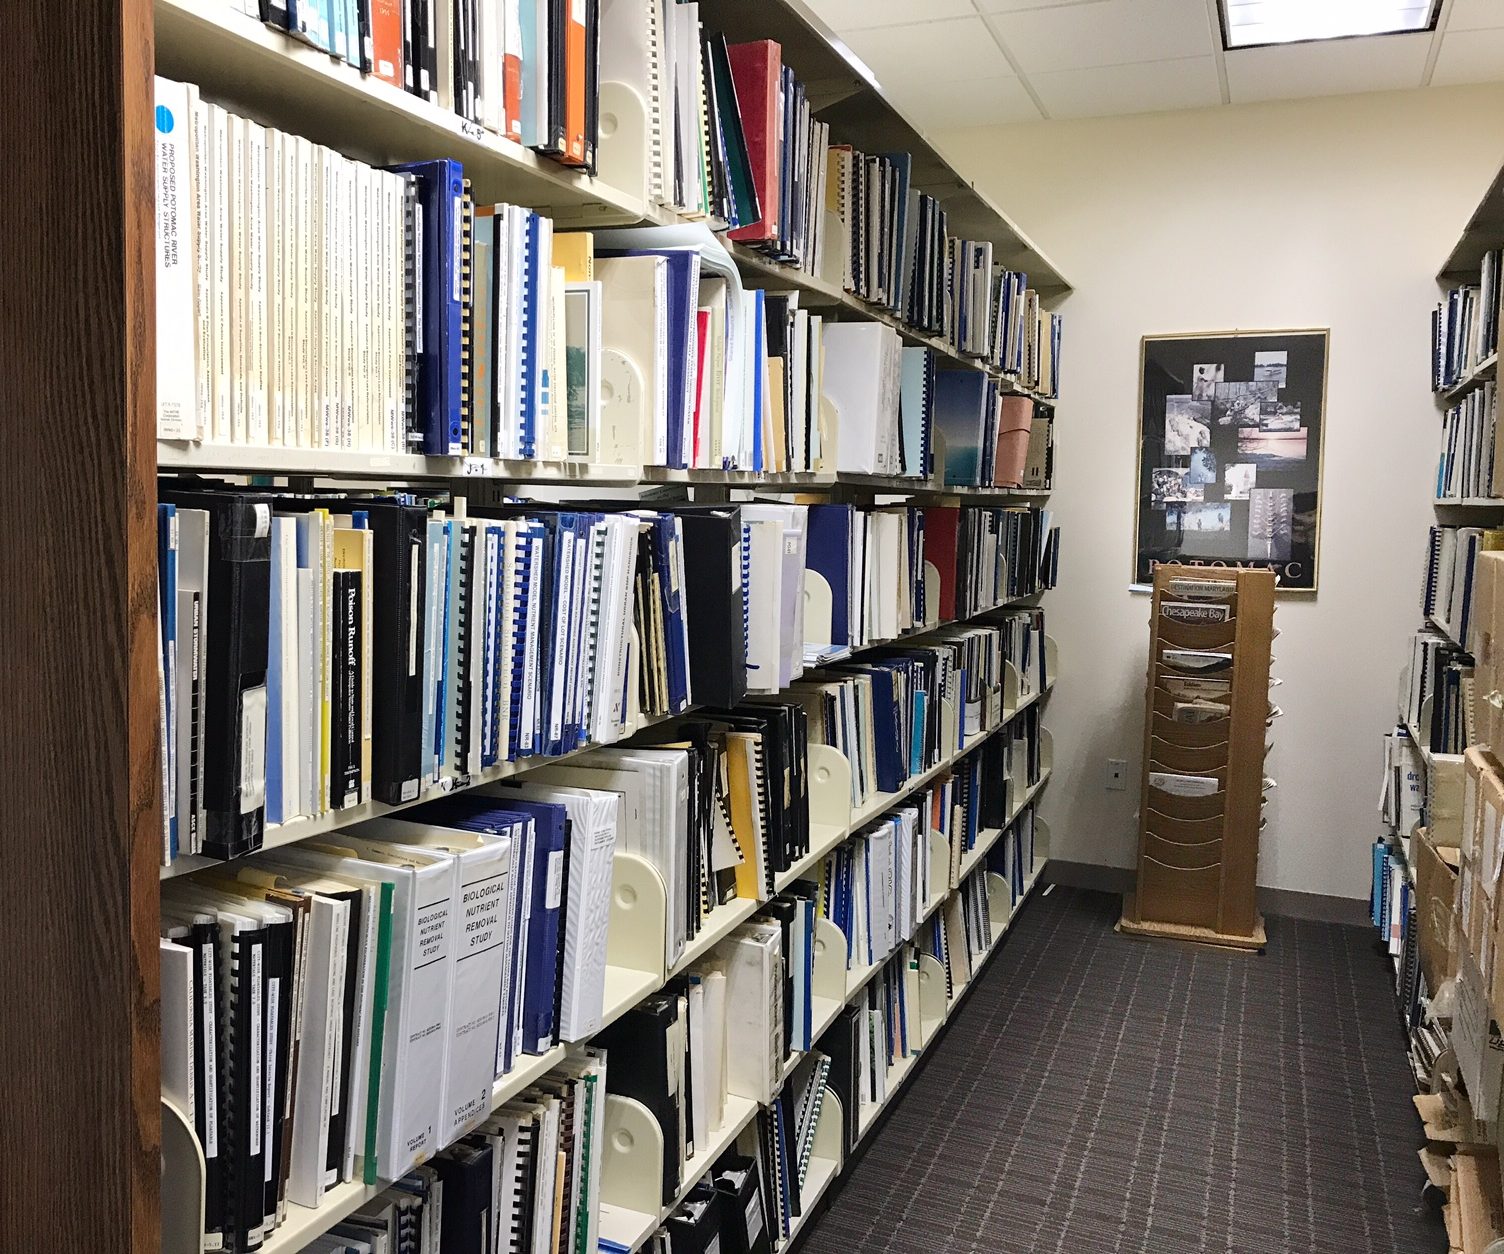 An image of tall bookshelves filled with reports, books, etc.